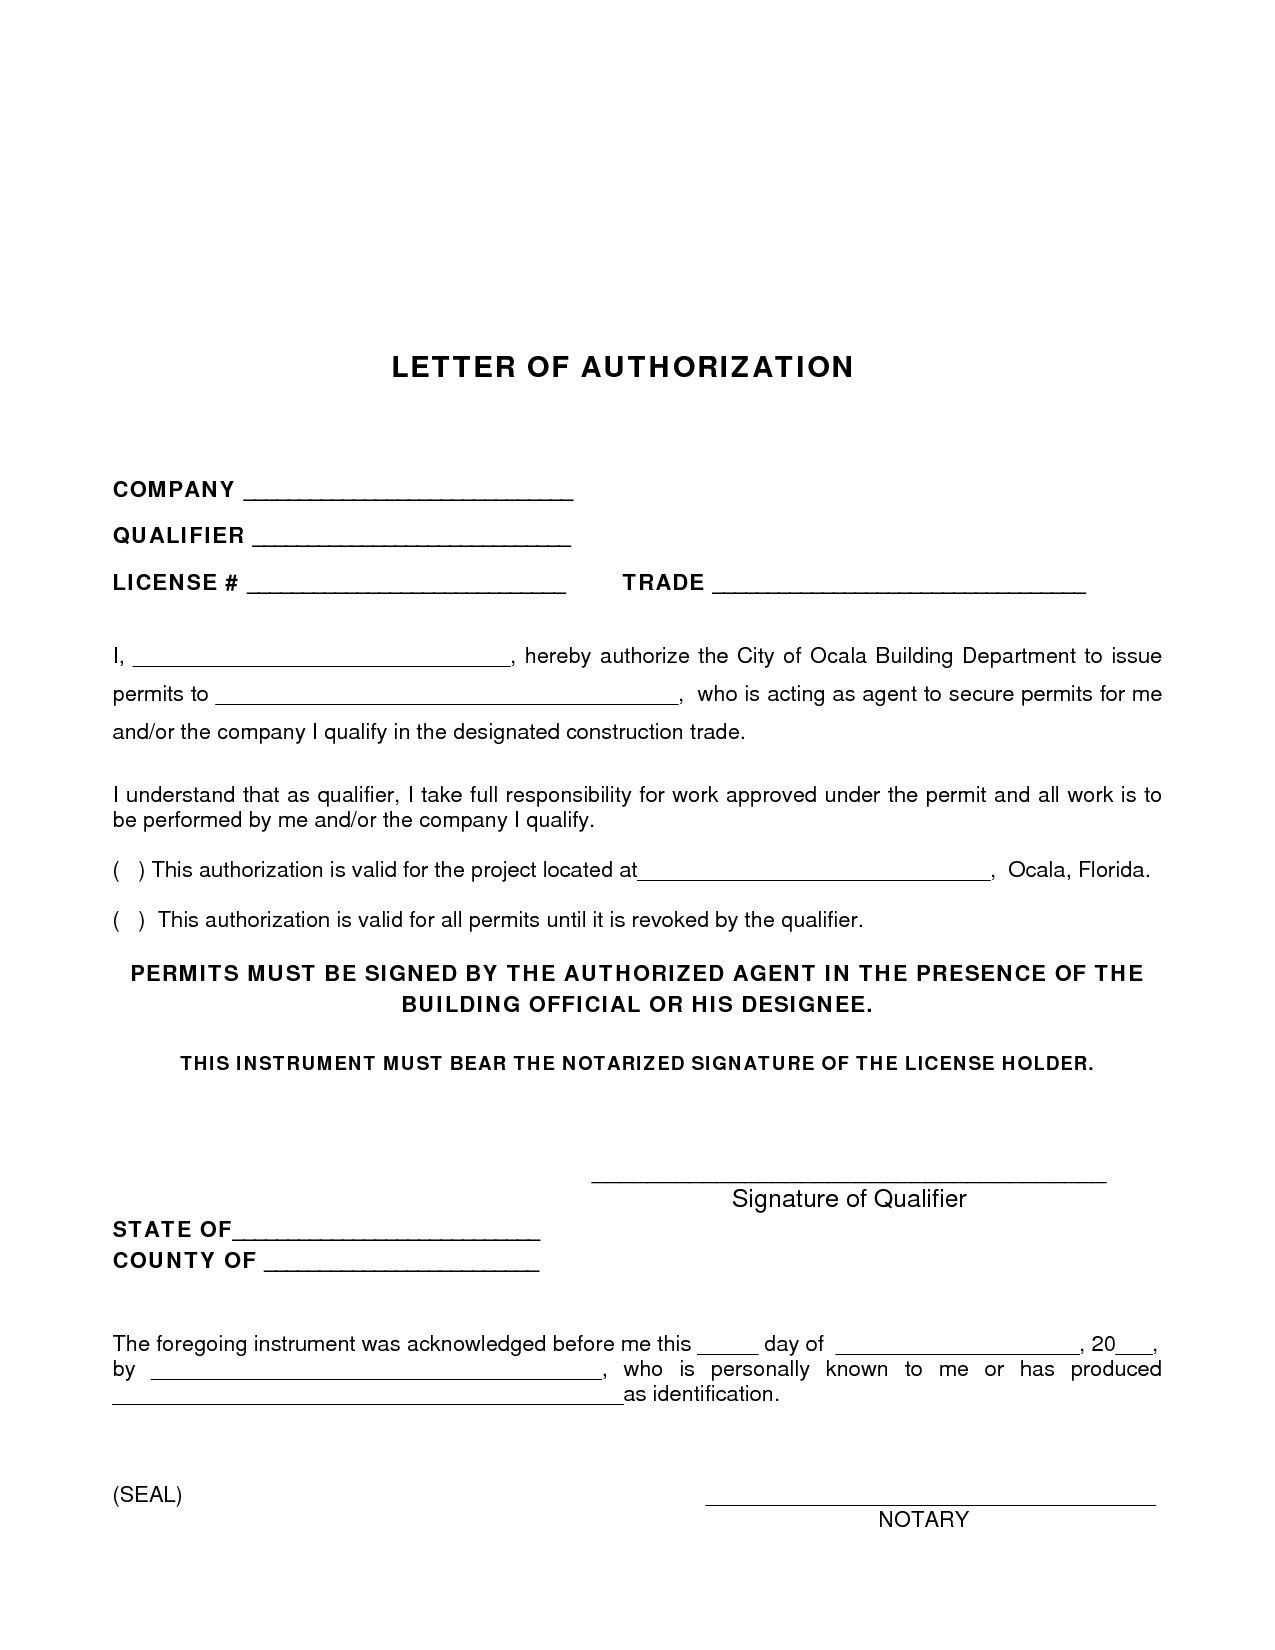 Valid Request For License Letter Format Business Letter throughout proportions 1275 X 1650